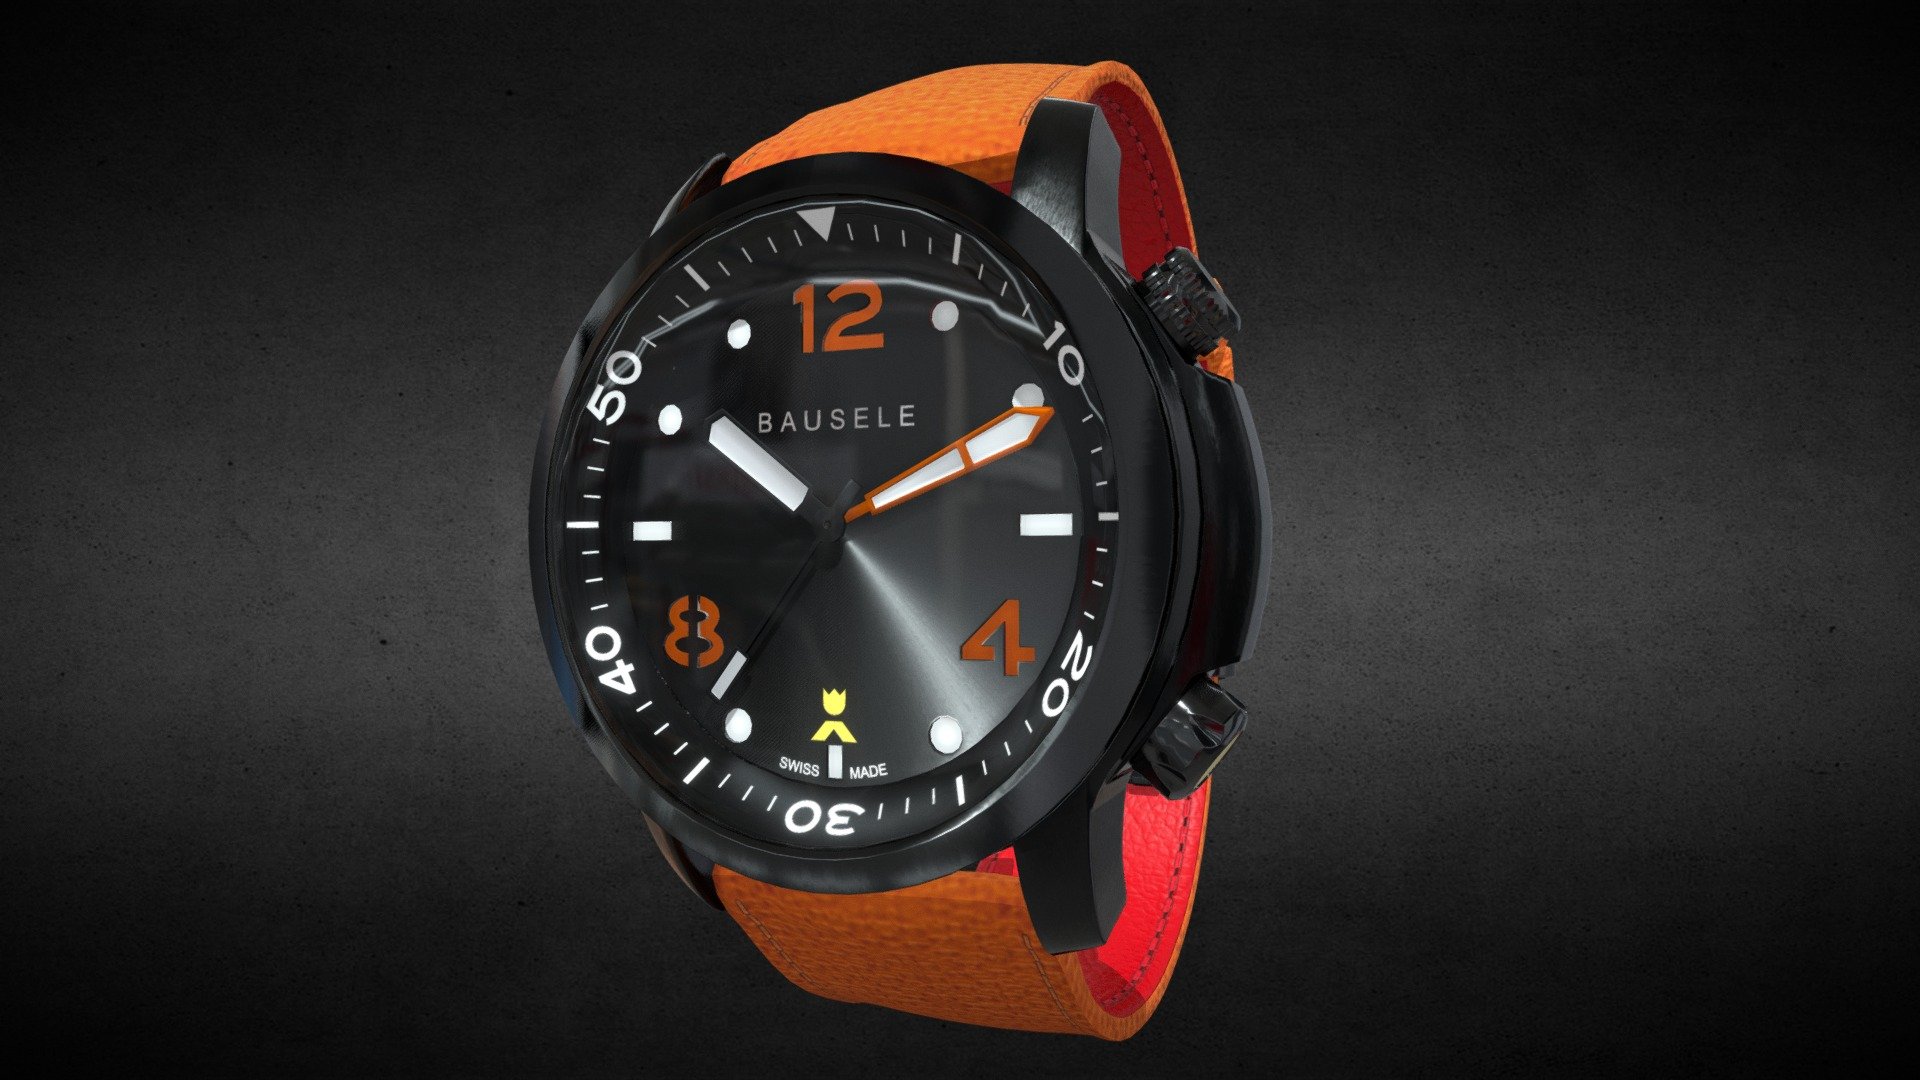 Awesome stainless steel Bausele Oceanmoon Orange Watchh․
Use for Unreal Engine 4 and Unity3D. Try in augmented reality in the AR-Watches app. 
Links to the app: Android, iOS

Currently available for download in FBX format.

3D model developed by AR-Watches

Disclaimer: We do not own the design of the watch, we only made the 3D model 3d model